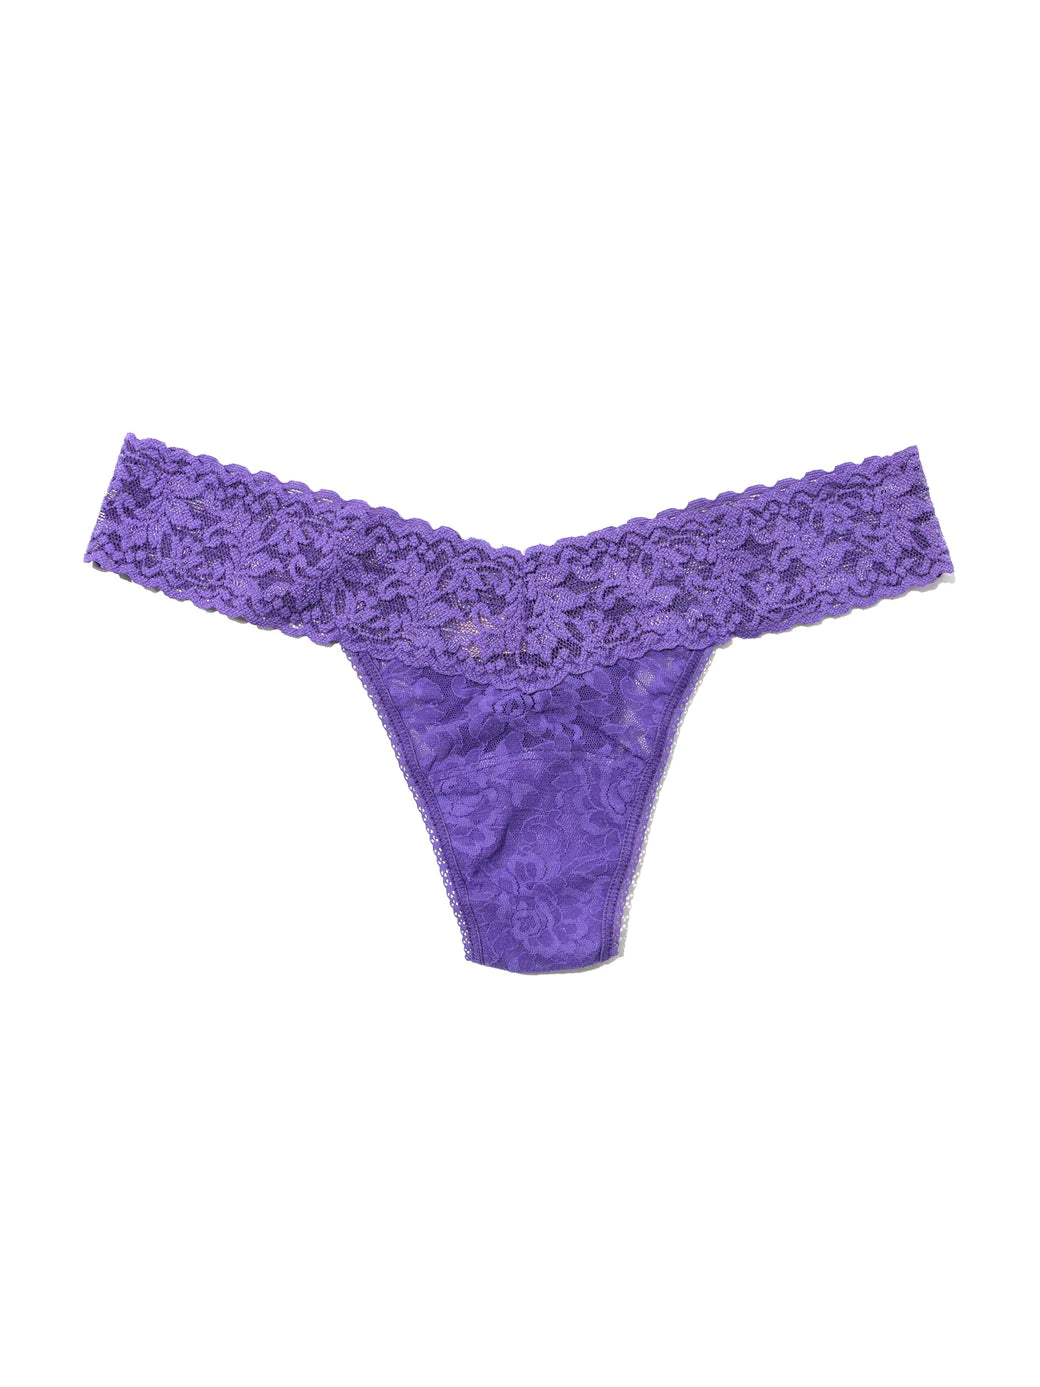 Buy wild-violet Hanky Panky Signature Lace Low Rise Thong - Packaged 4911p